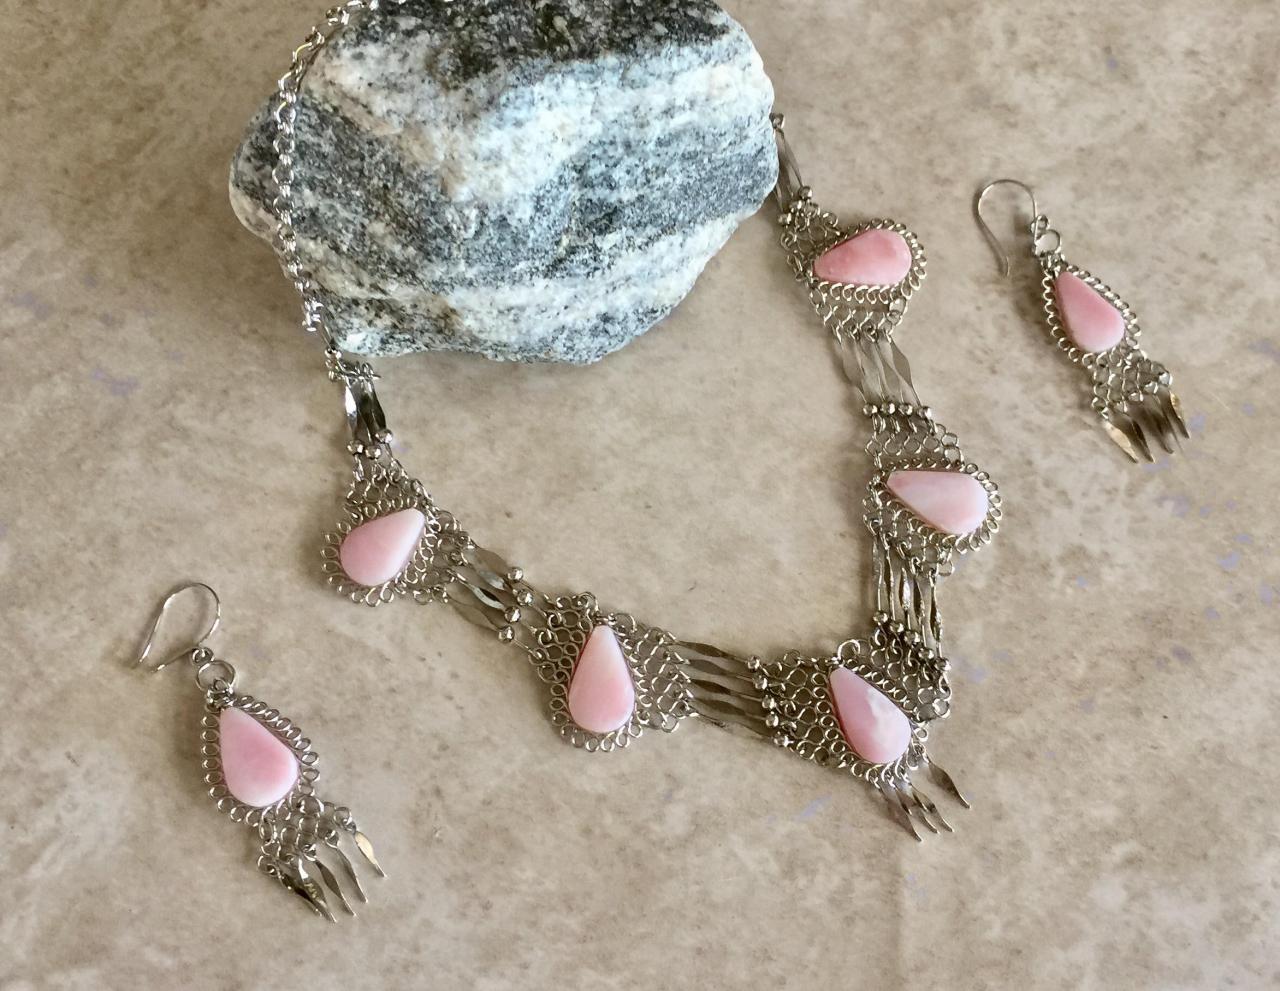 Teardrop Necklace And Earrings, Rose Quartz Necklace, Pink Necklace, Chandelier Necklace, Alpaca Silver Necklace, Handmade Necklace, Ethnic